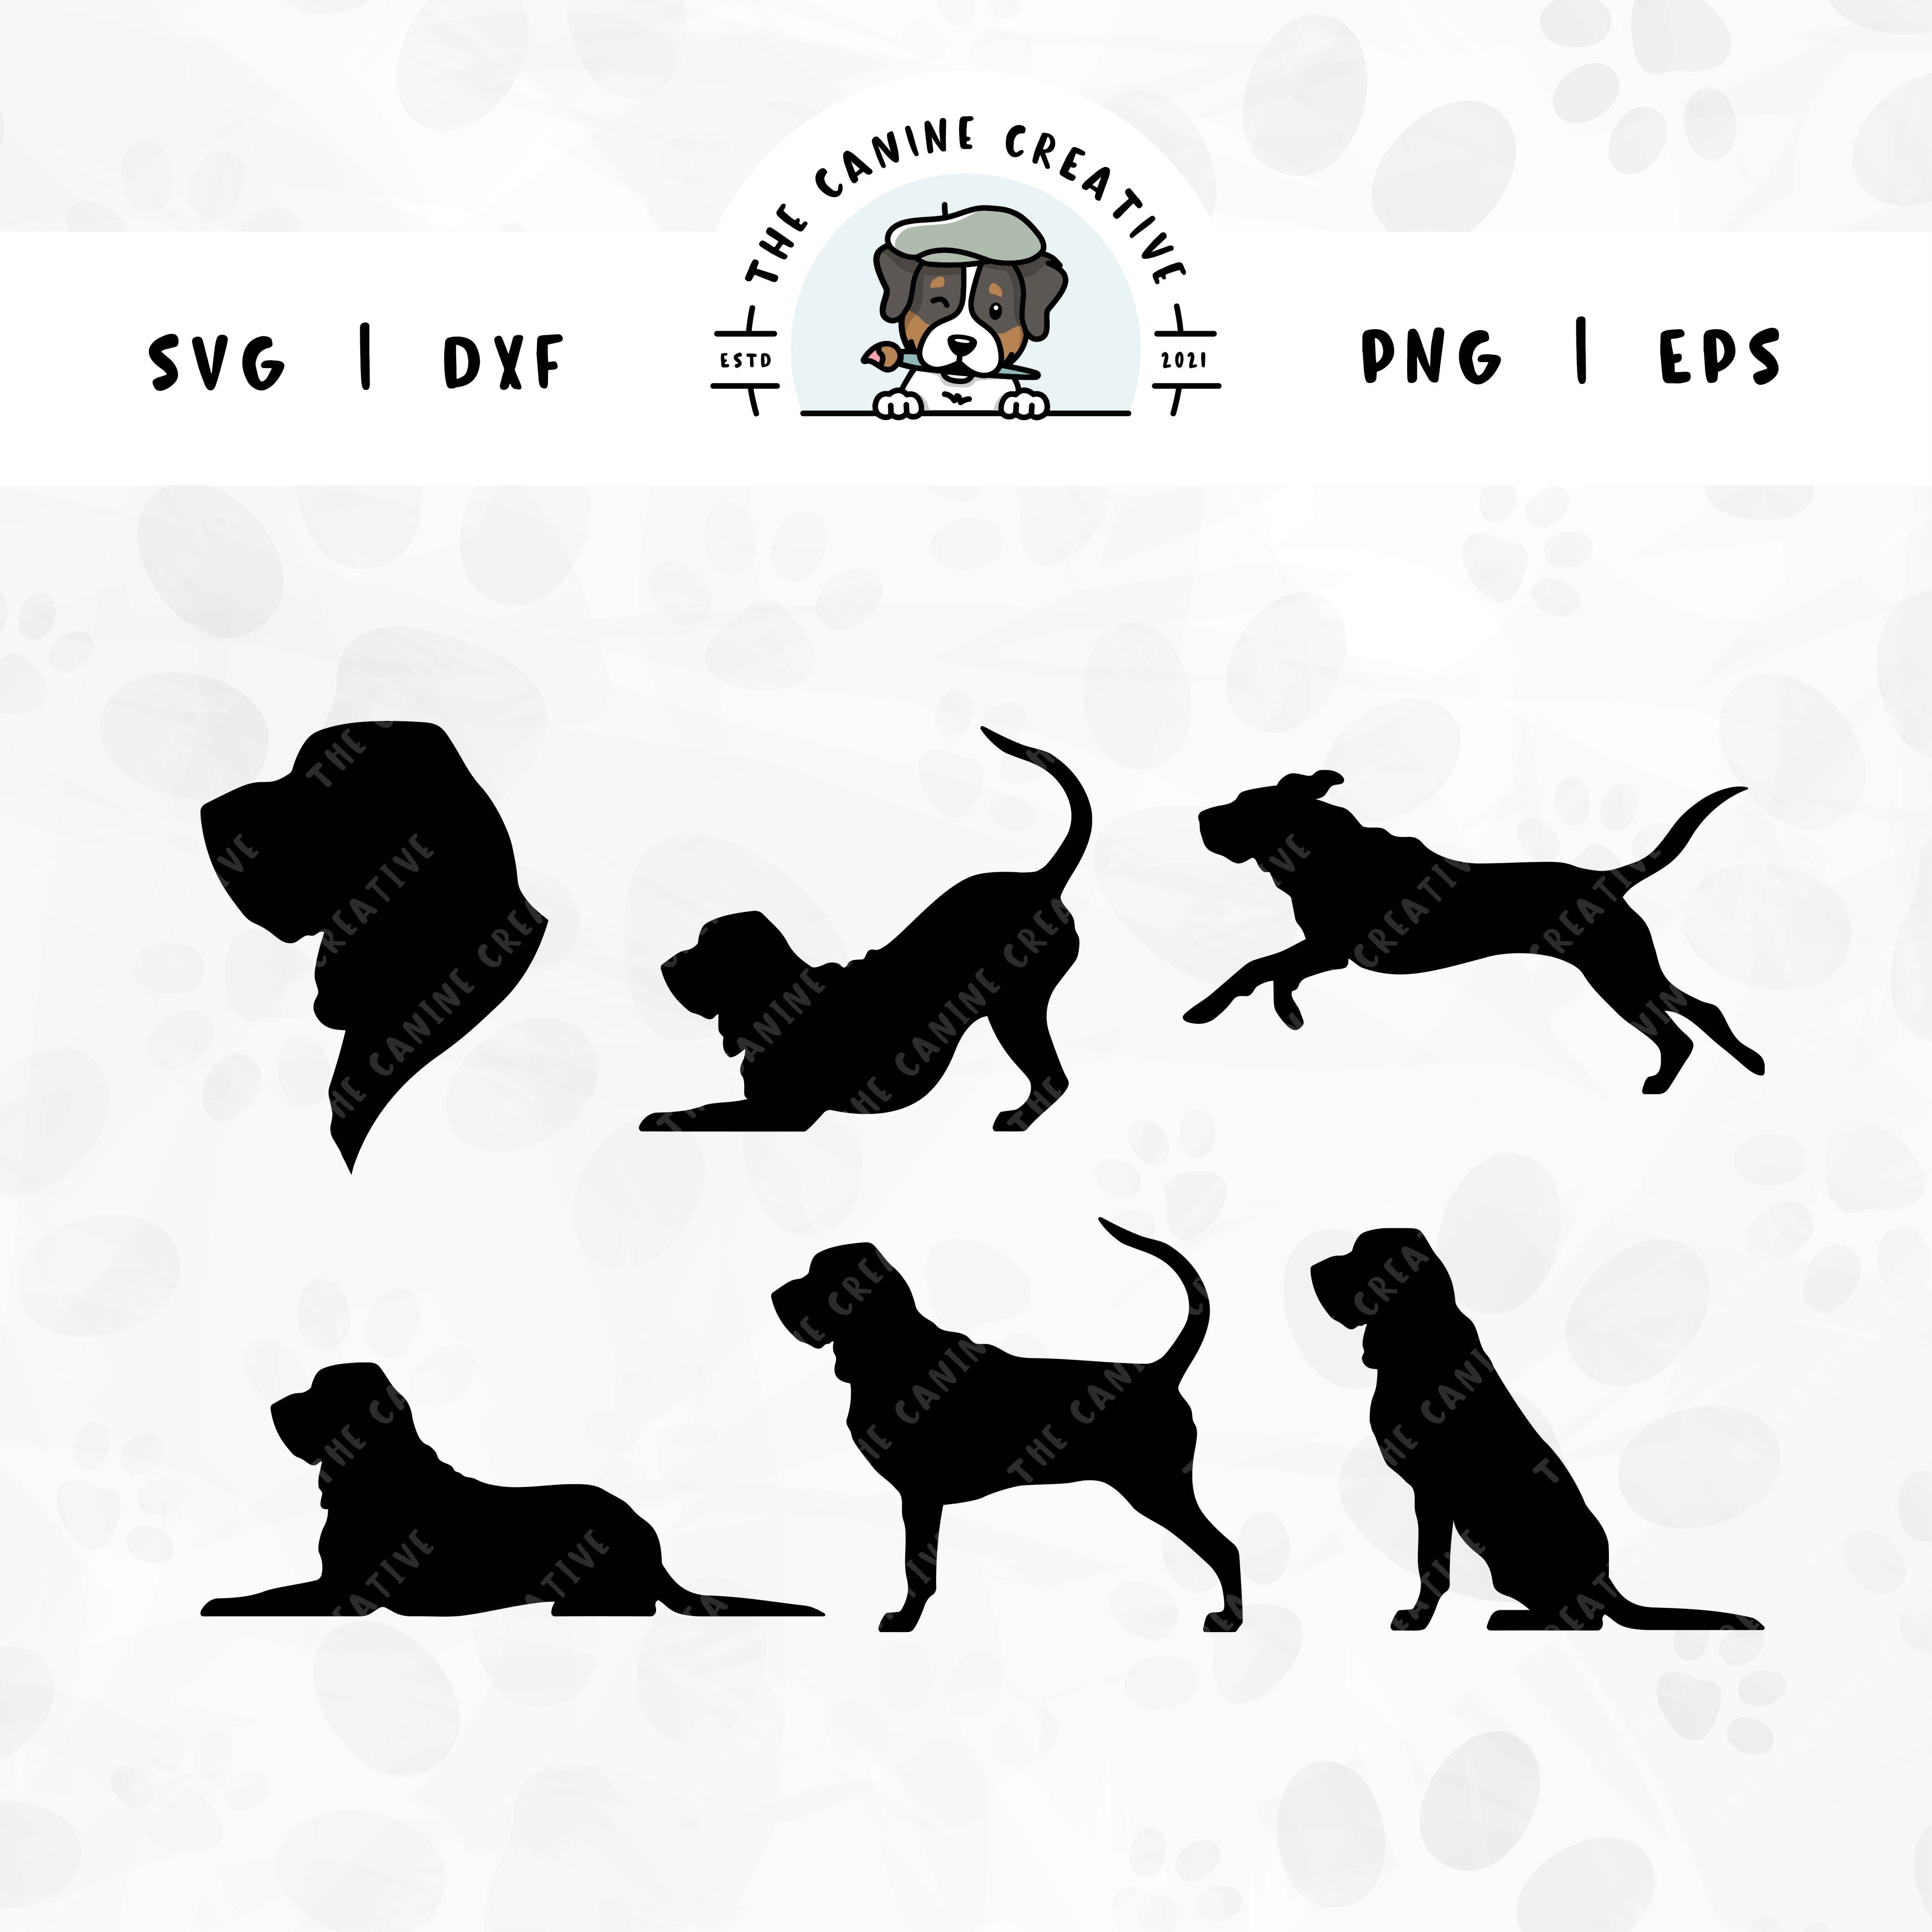 This 6-pack Bloodhound silhouette bundle (set 1) features a dog's head in profile, along with various poses including running, laying down, playing, standing, and sitting. File formats include: SVG, DXF, PNG, and EPS.